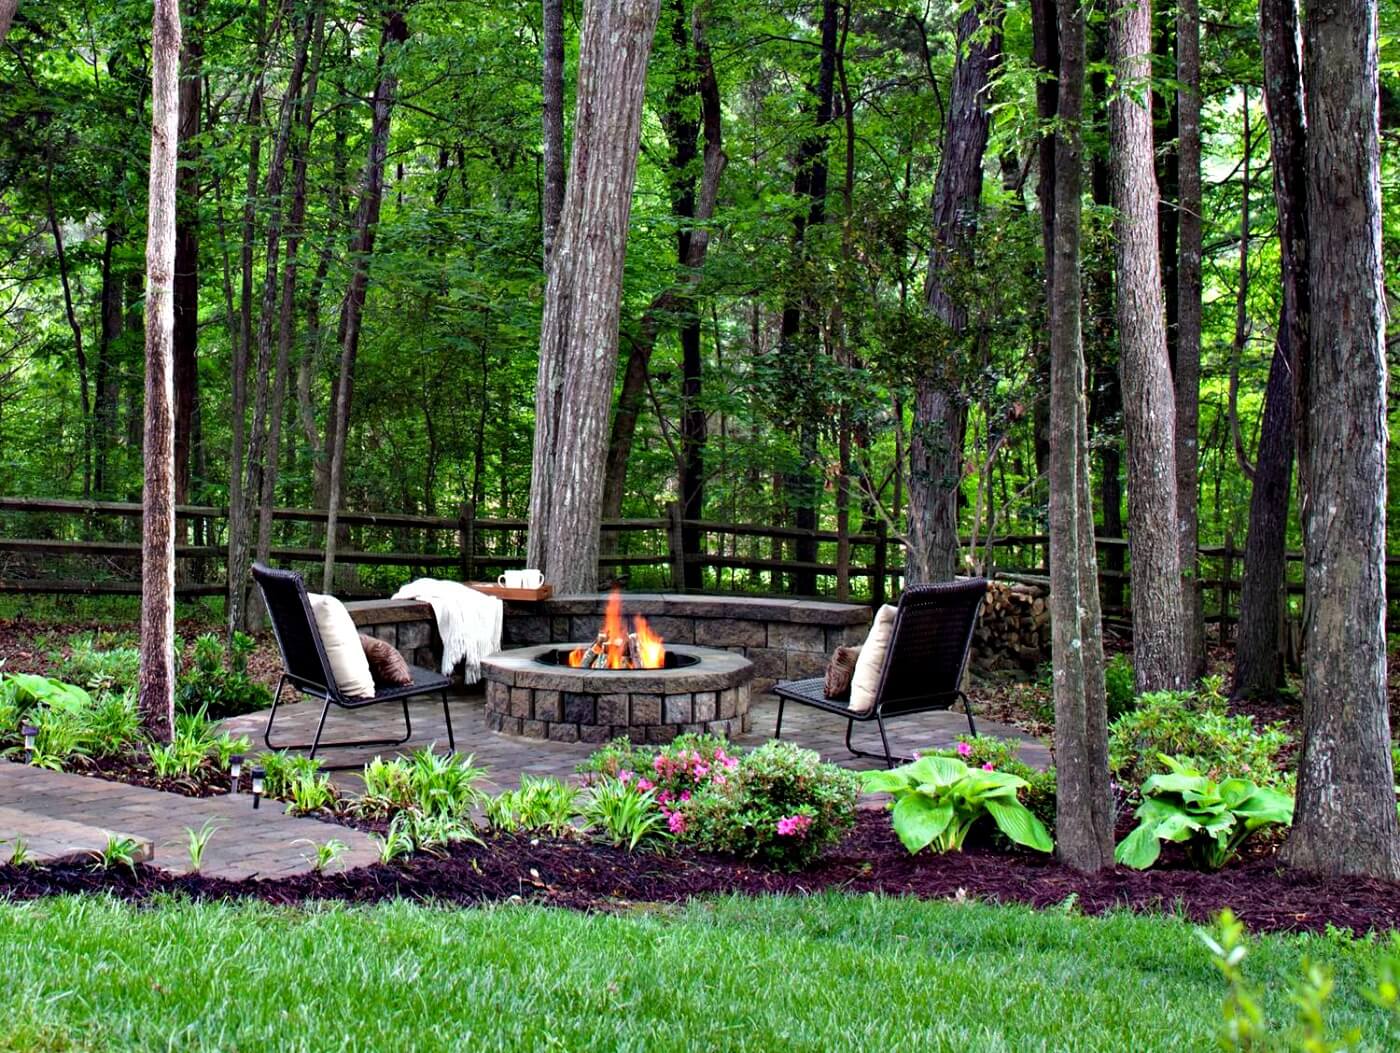 Custom patio with fire pit